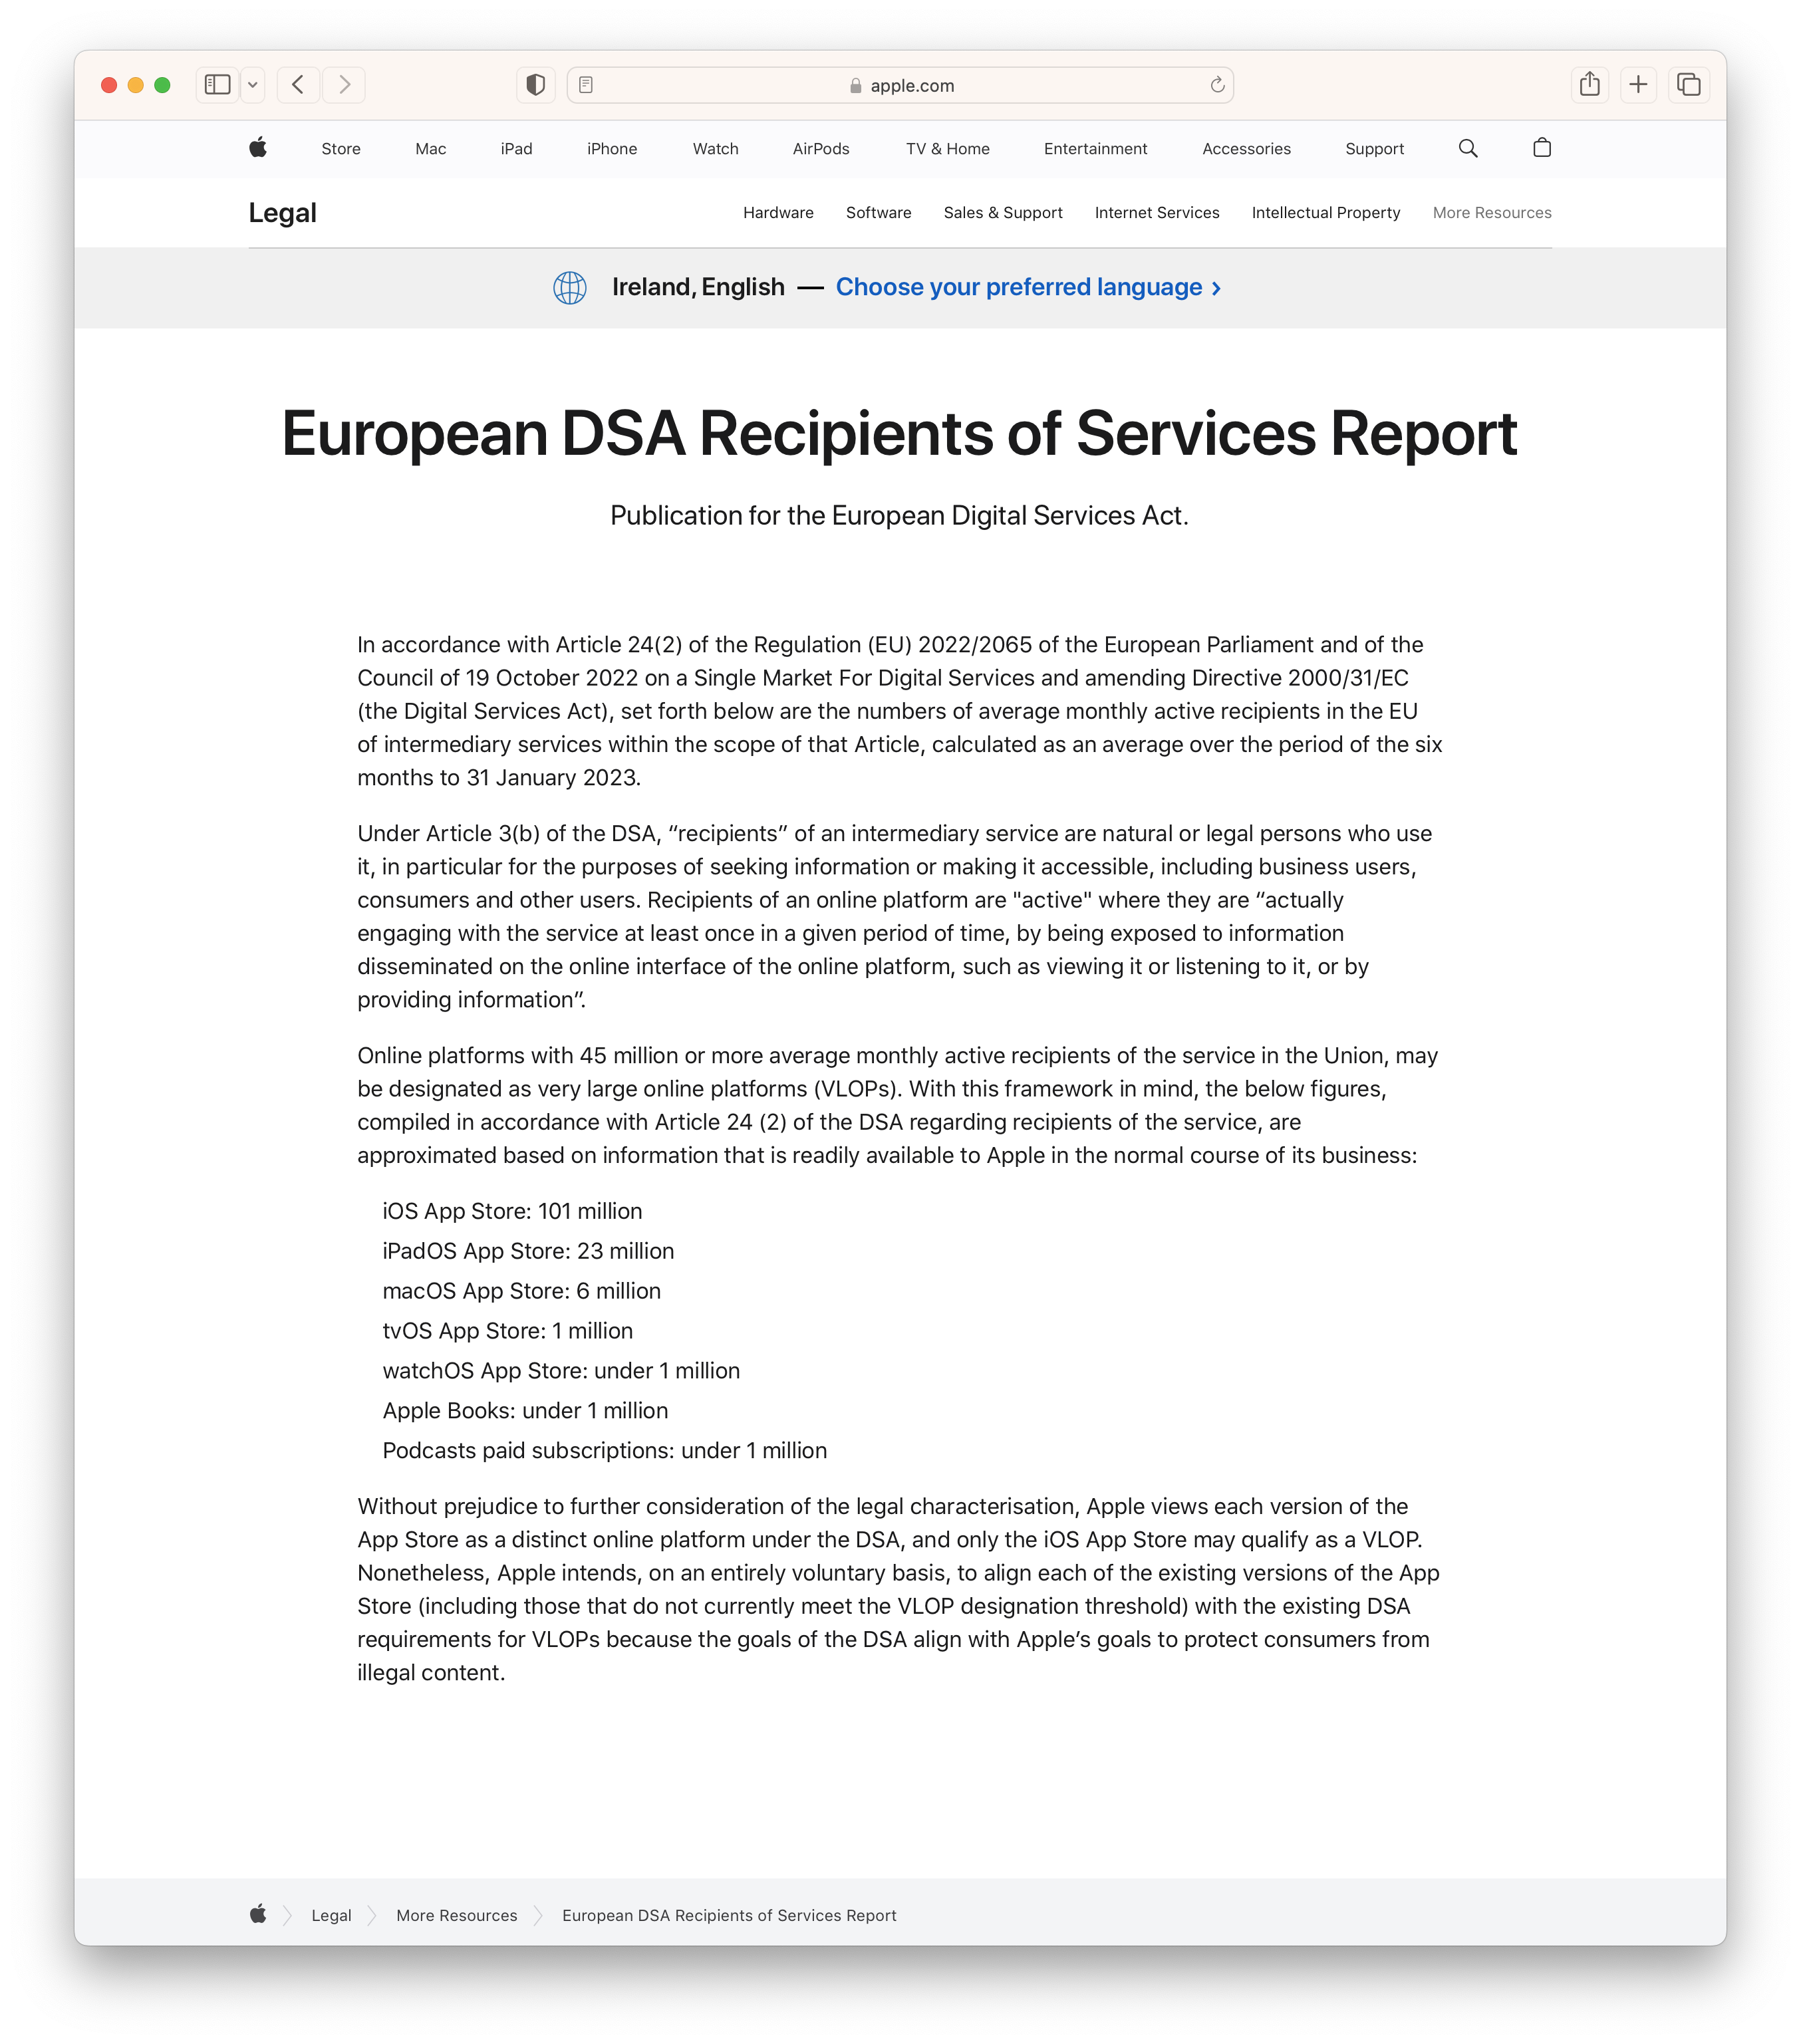 European DSA Recipients of Services Report

Online platforms with 45 million or more average monthly active recipients of the service in the Union, may be designated as very large online platforms (VLOPs). With this framework in mind, the below figures, compiled in accordance with Article 24 (2) of the DSA regarding recipients of the service, are approximated based on information that is readily available to Apple in the normal course of its business:

iOS App Store: 101 million
iPadOS App Store: 23 million
macOS App Store: 6 million
tvOS App Store: 1 million
watchOS App Store: under 1 million
Apple Books: under 1 million
Podcasts paid subscriptions: under 1 million